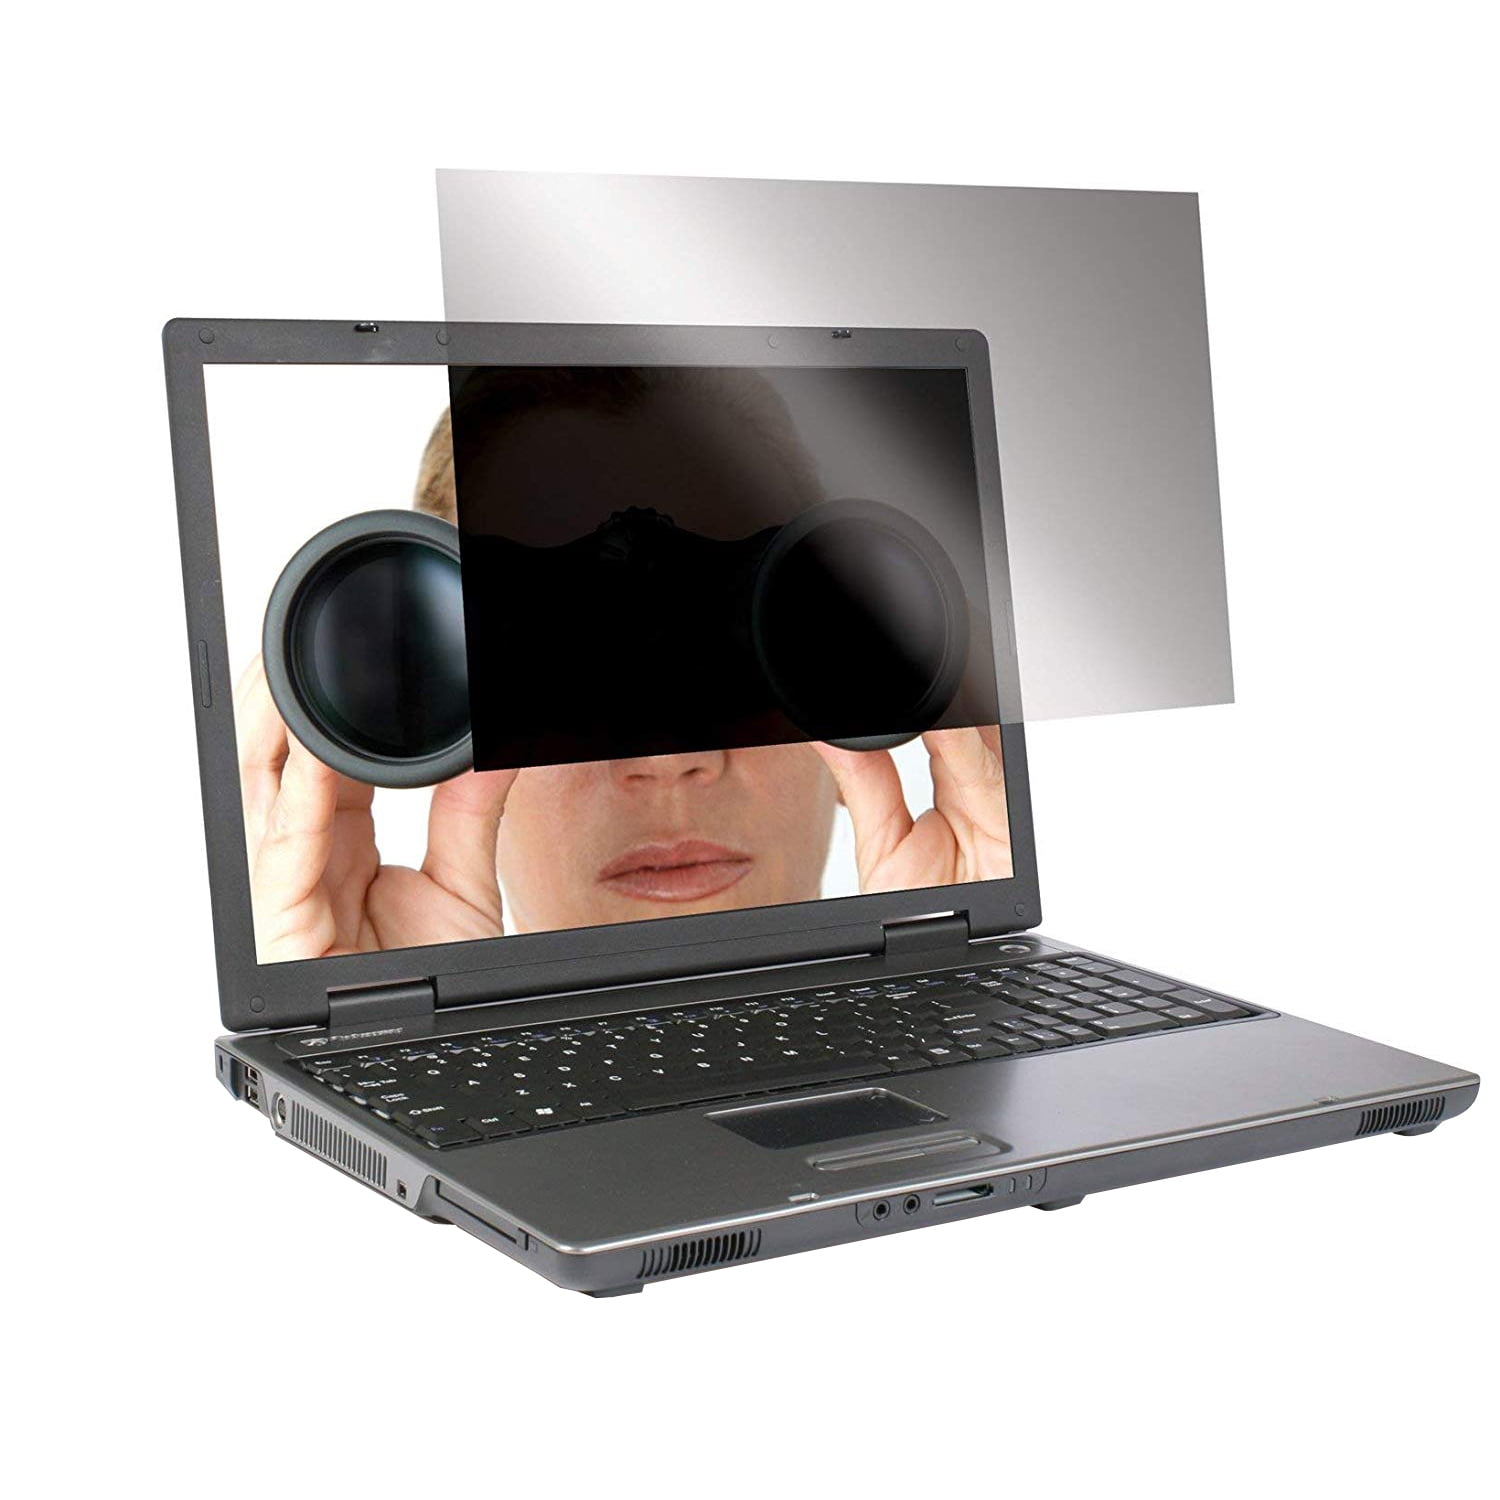 The Excellent Quality 15.6 Widescreen Laptop Privac